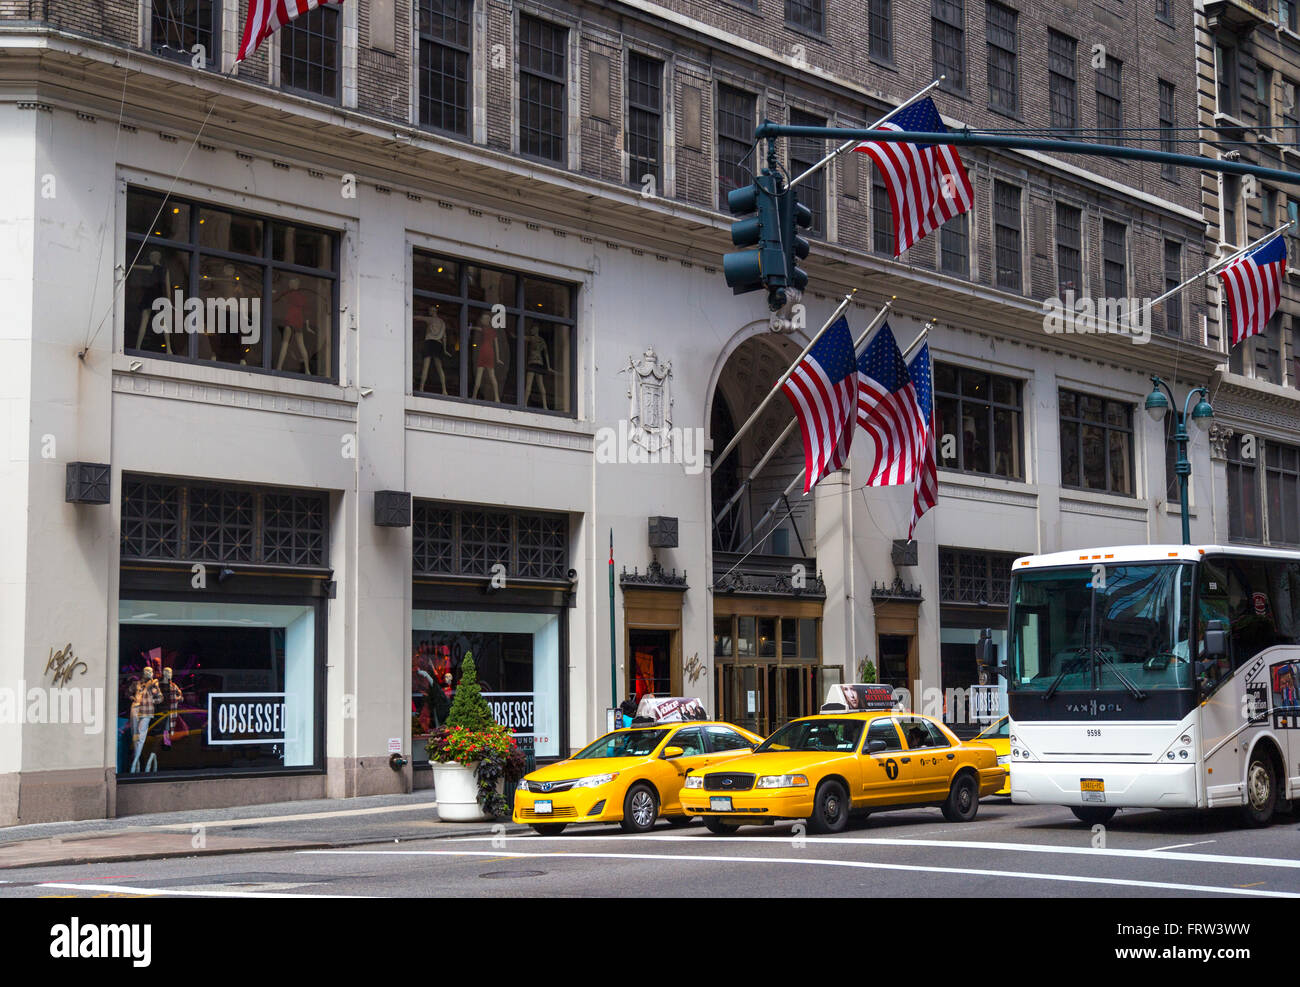 Traffic in New York City with famous yellow-coloured taxi cabs passing by Stock Photo